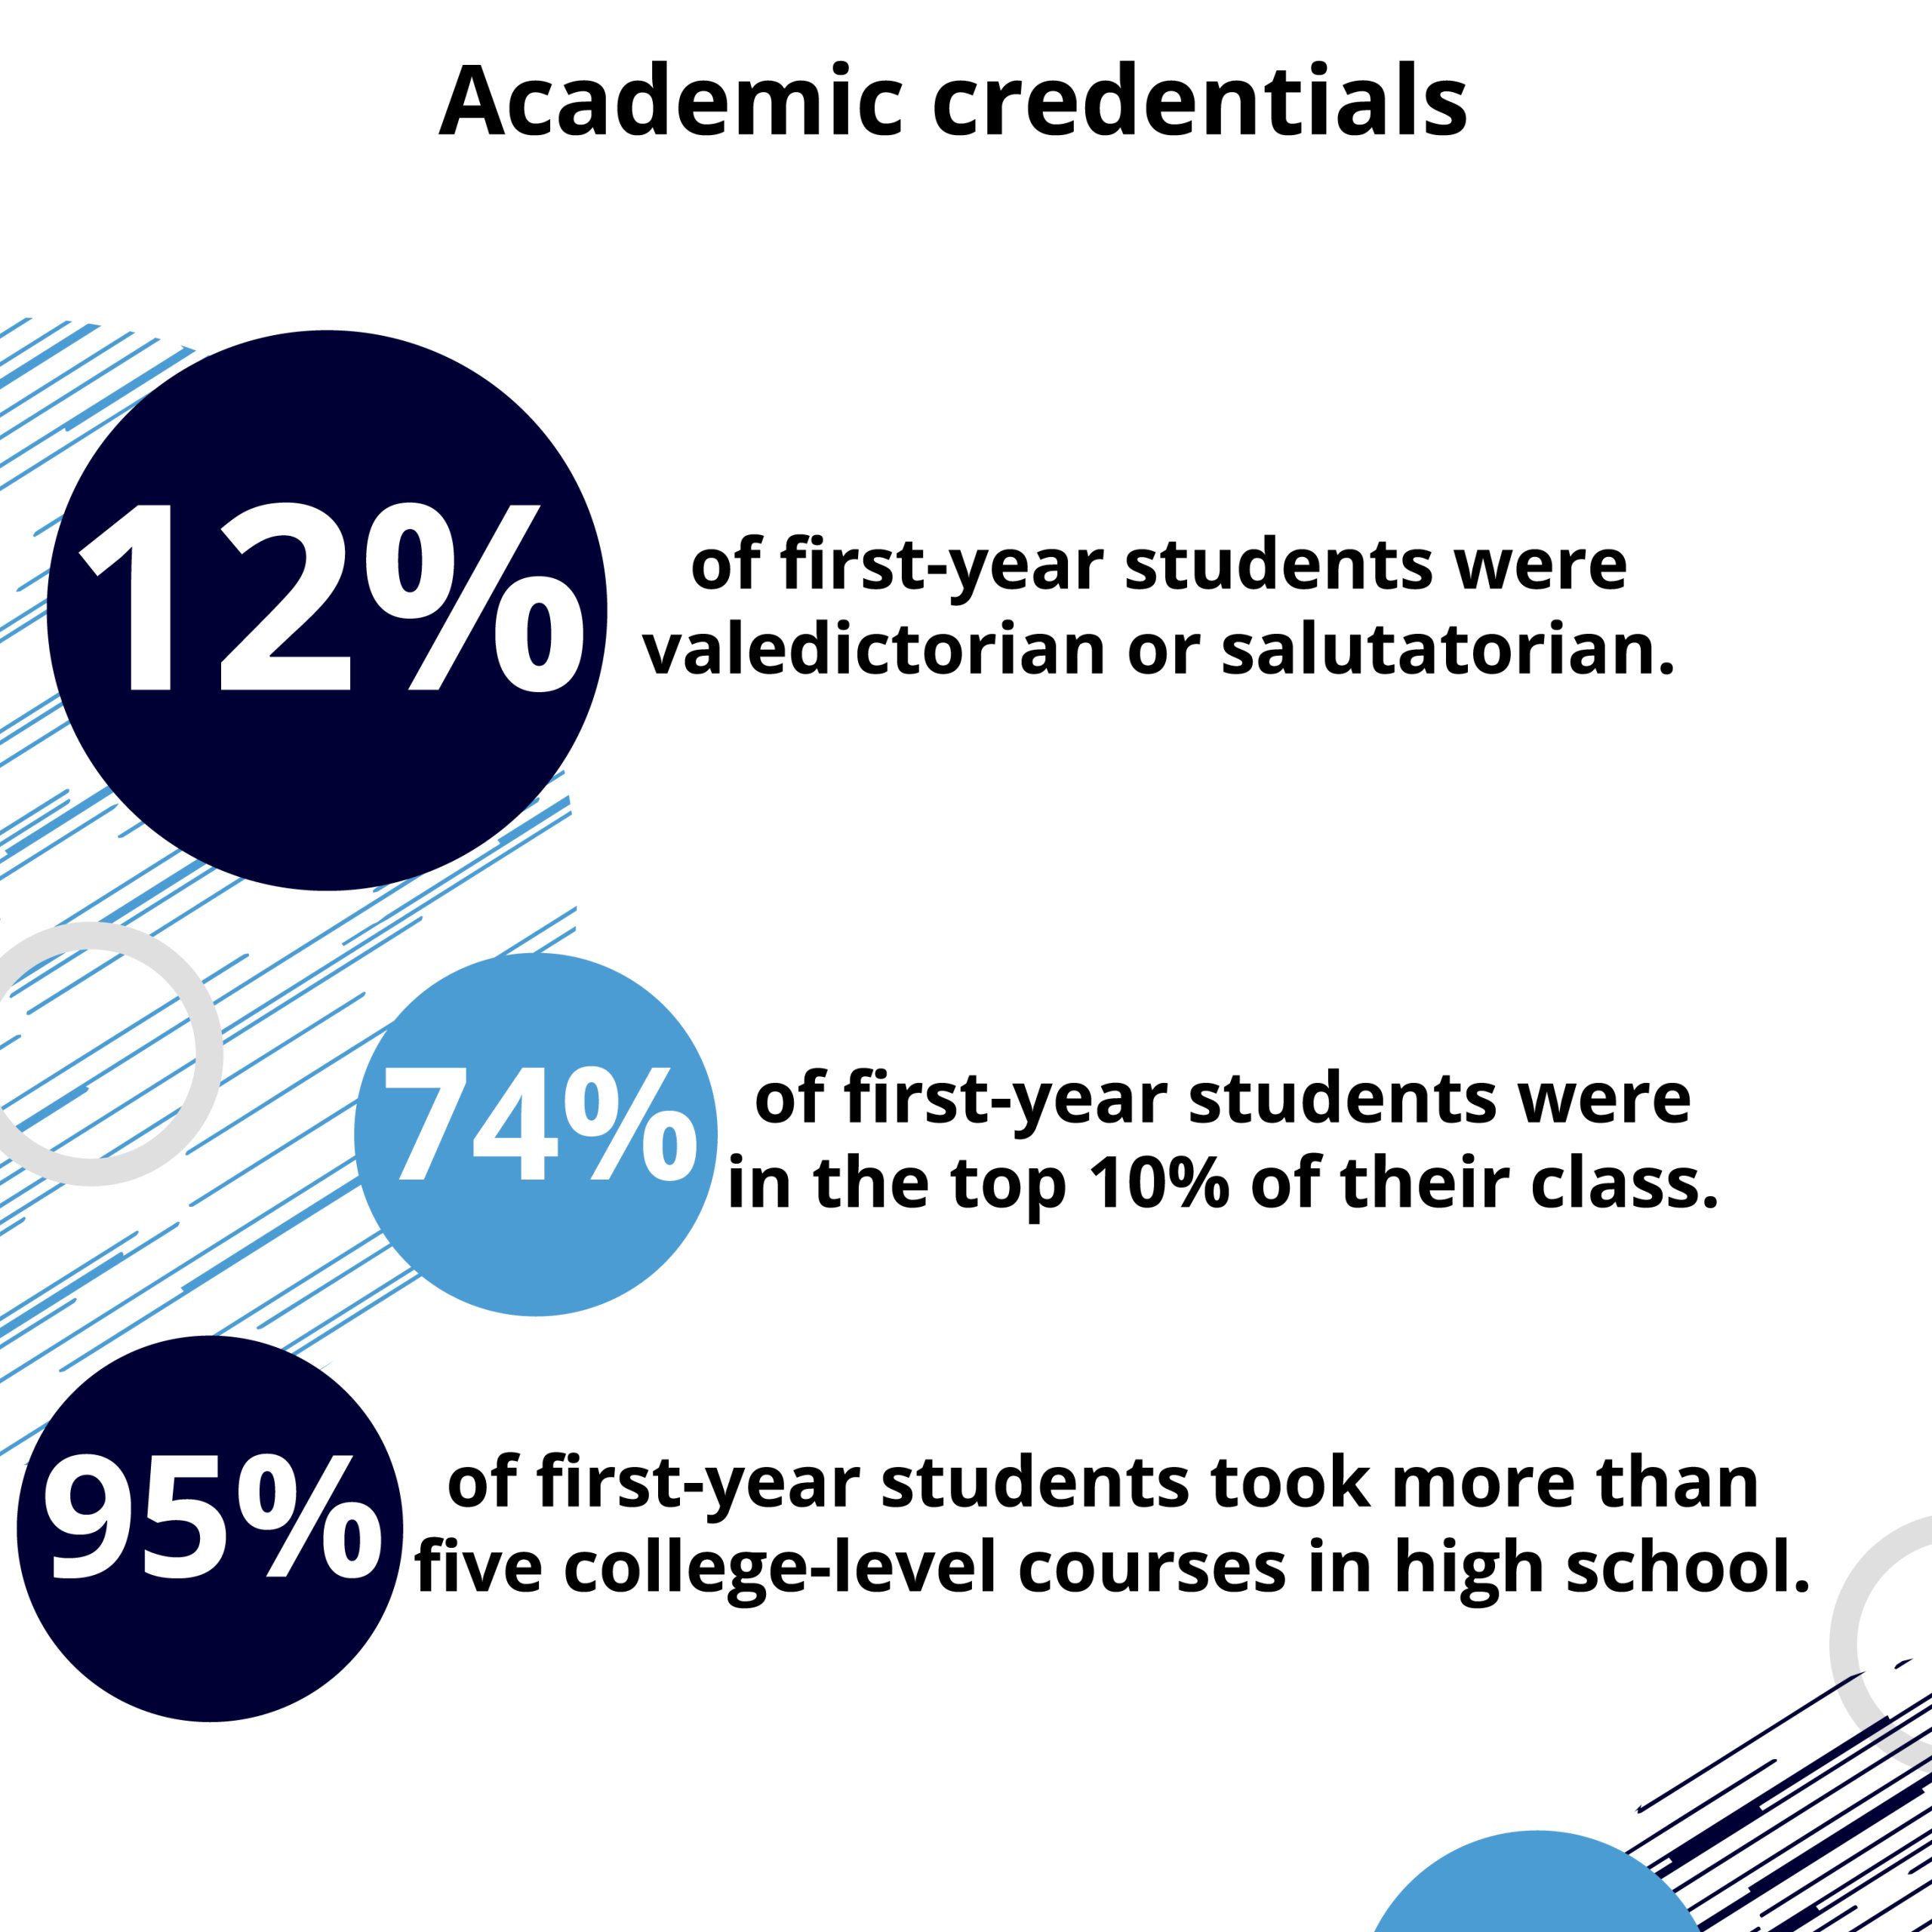 Graphic showing three data points: 12% of first-year students were valedictorian or salutatorian; 74% of first-year students were in the top 10% of their class; 95% of first-year students took more than five college-level courses in high school. 